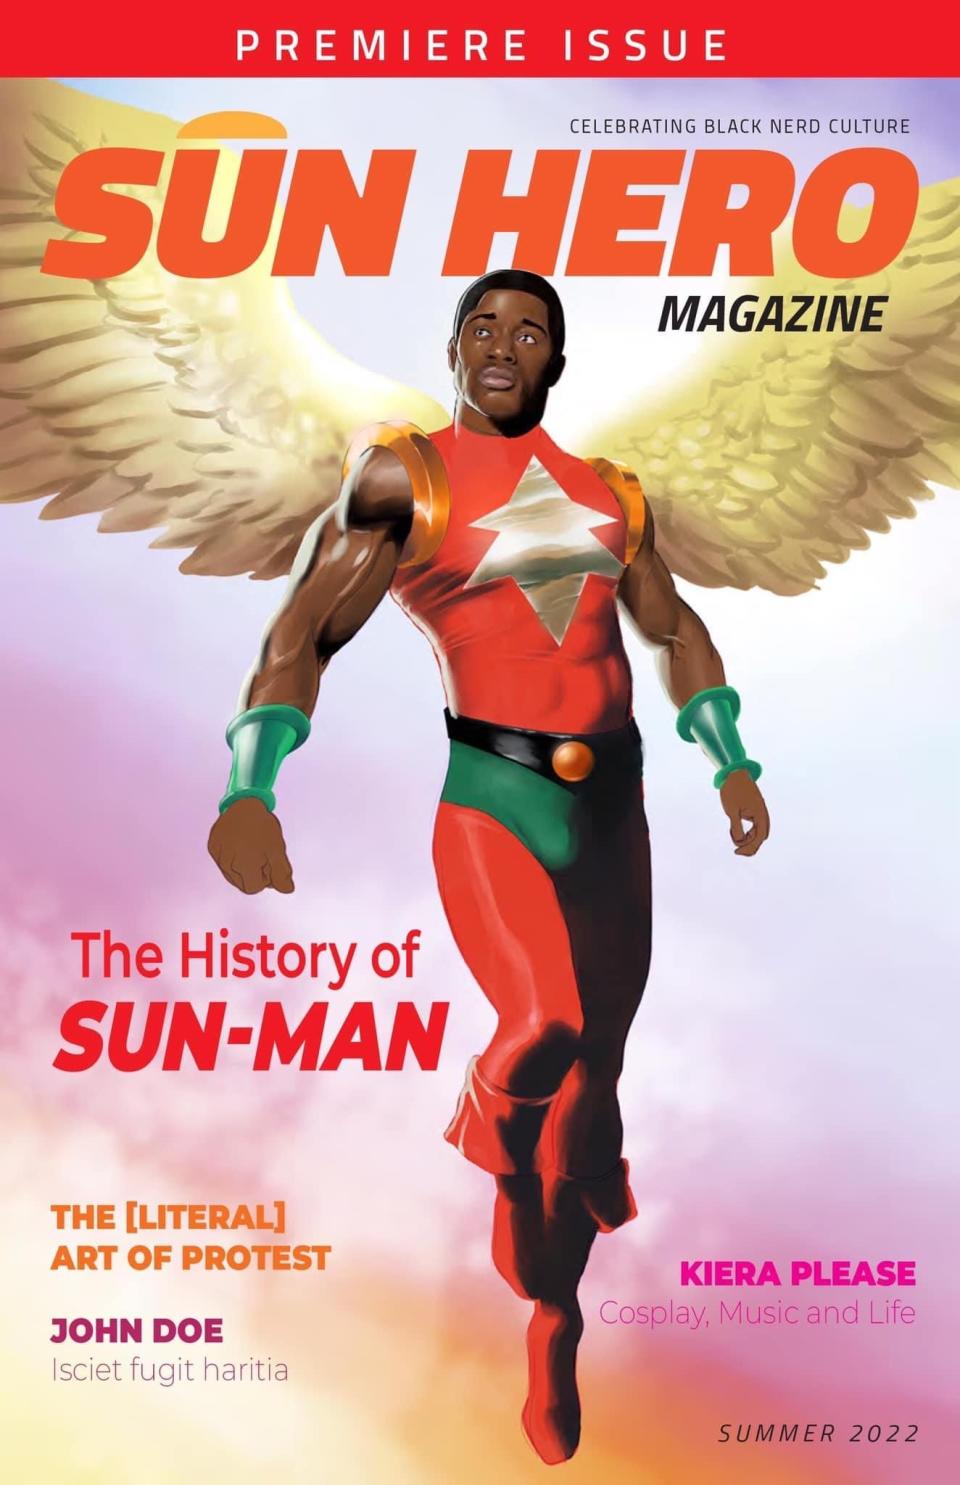 Sun Hero magazine is a concept magazine created by Dane Shobe to showcase Black creators. The magazine is expected to be released digitally in 2023.